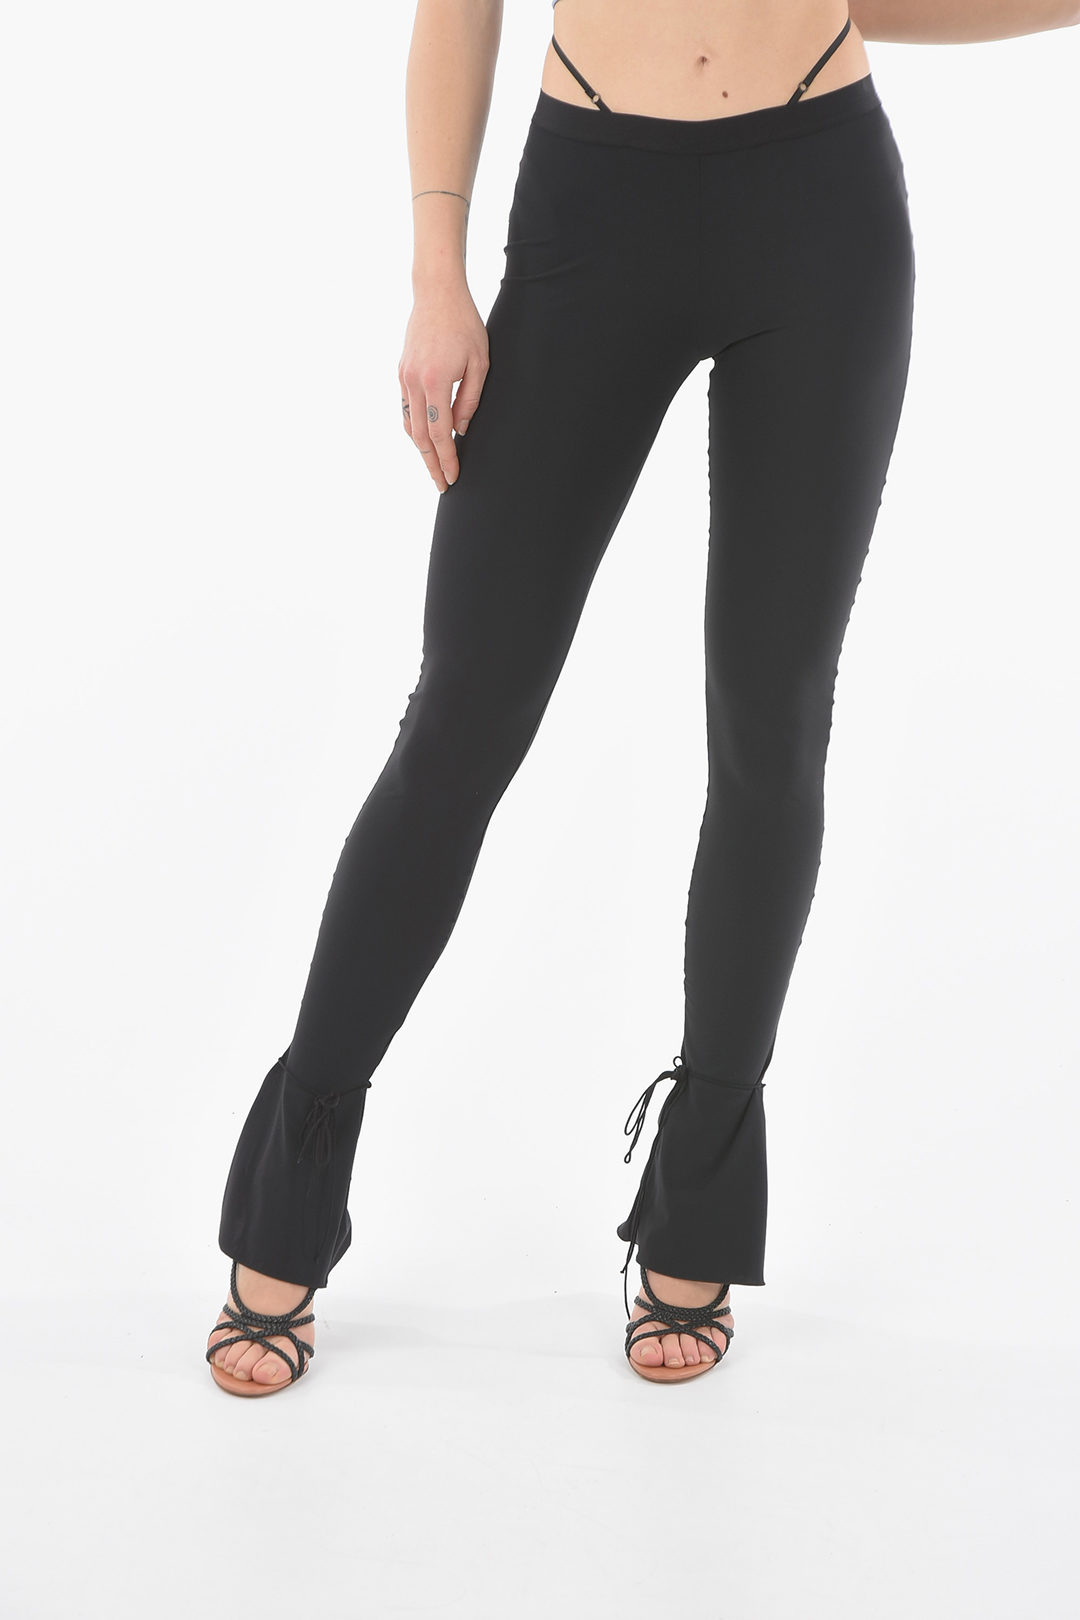 Armoire | Rent this Paige Mid-Rise Dark Ankle Cut Skinny Jeans-sonthuy.vn